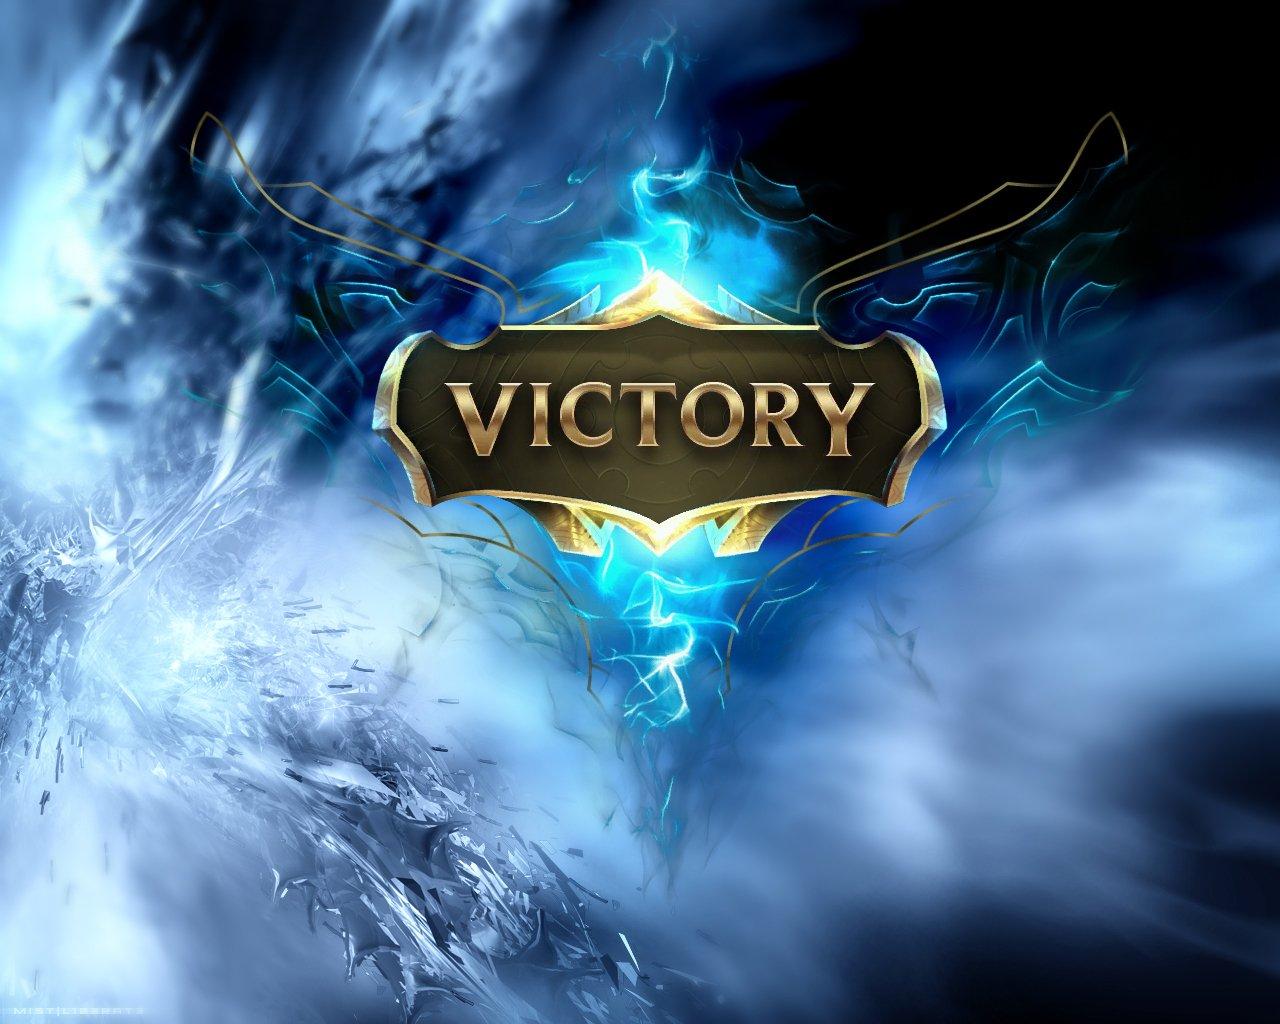 Victory wallpapers